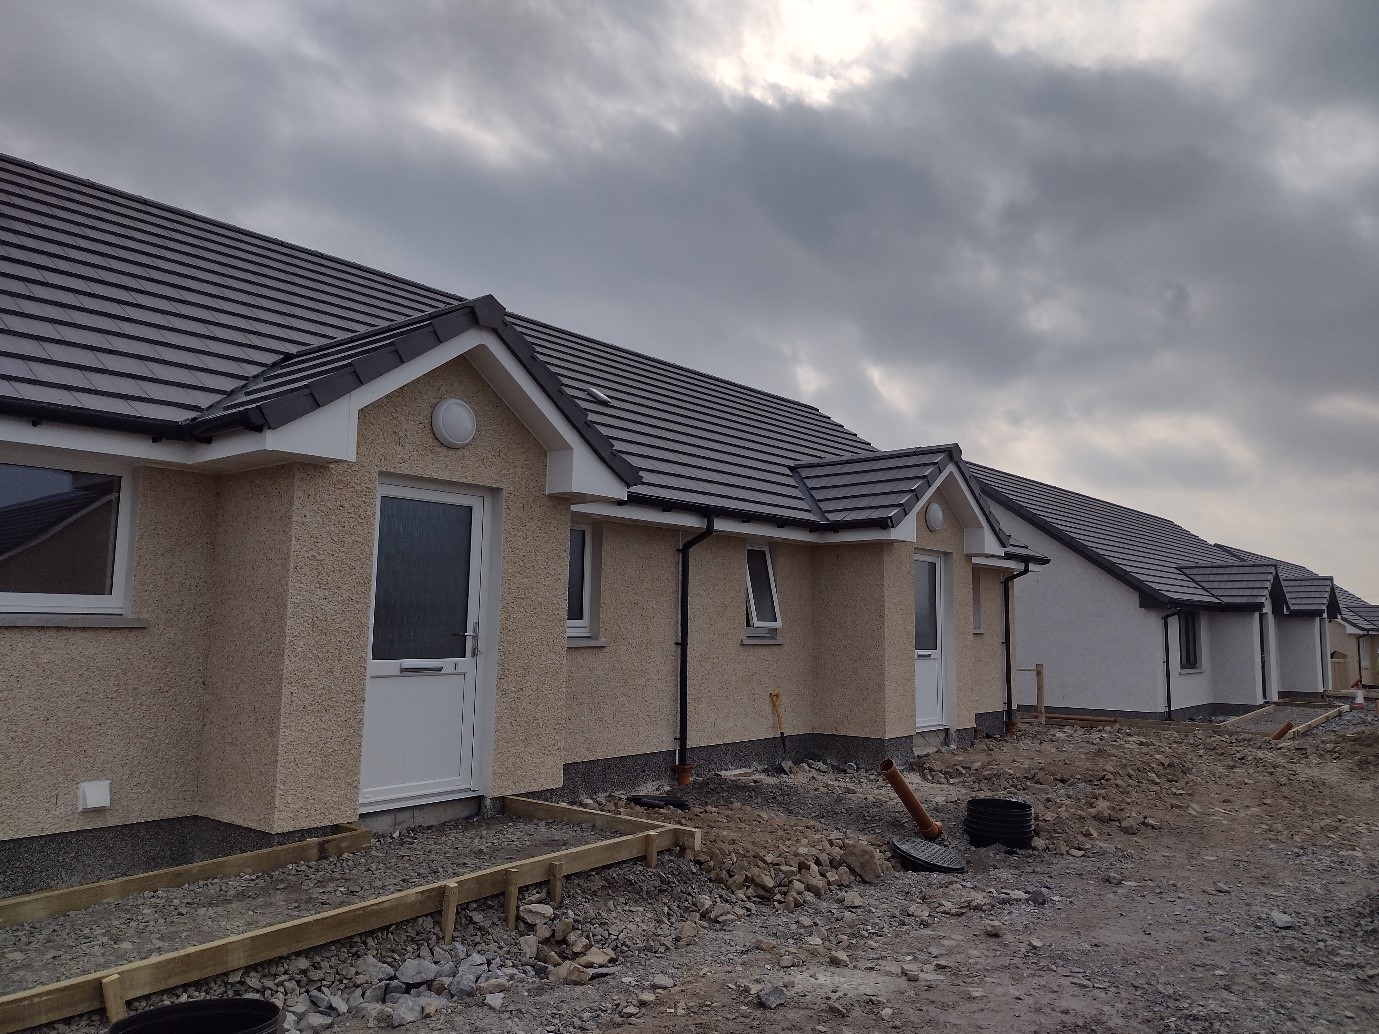 HHP celebrates opening of new housing developments in South Uist